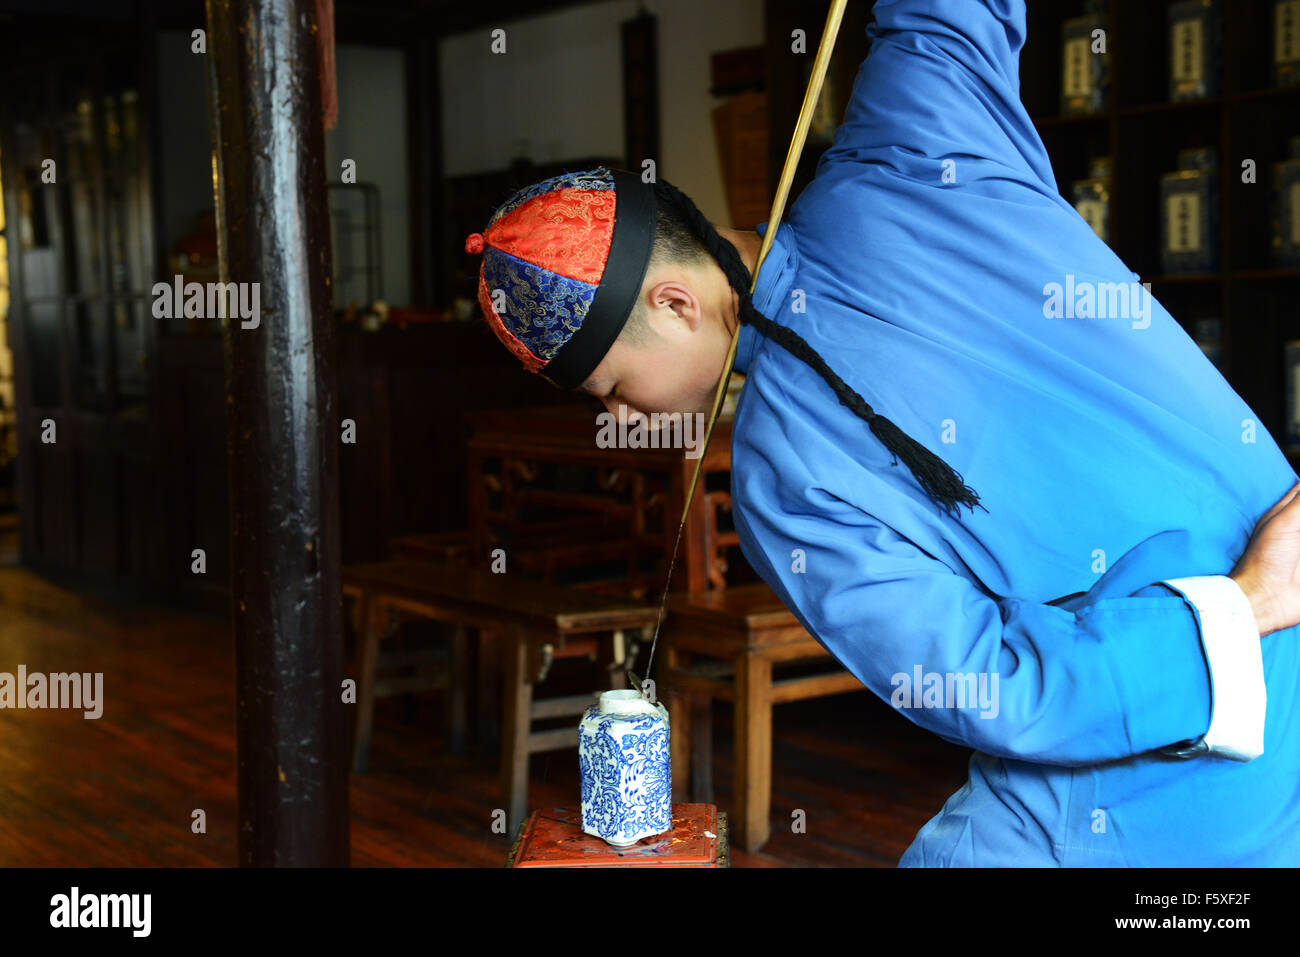 https://c8.alamy.com/comp/F5XF2F/pouring-hot-water-for-tea-in-a-traditional-acrobatic-way-F5XF2F.jpg